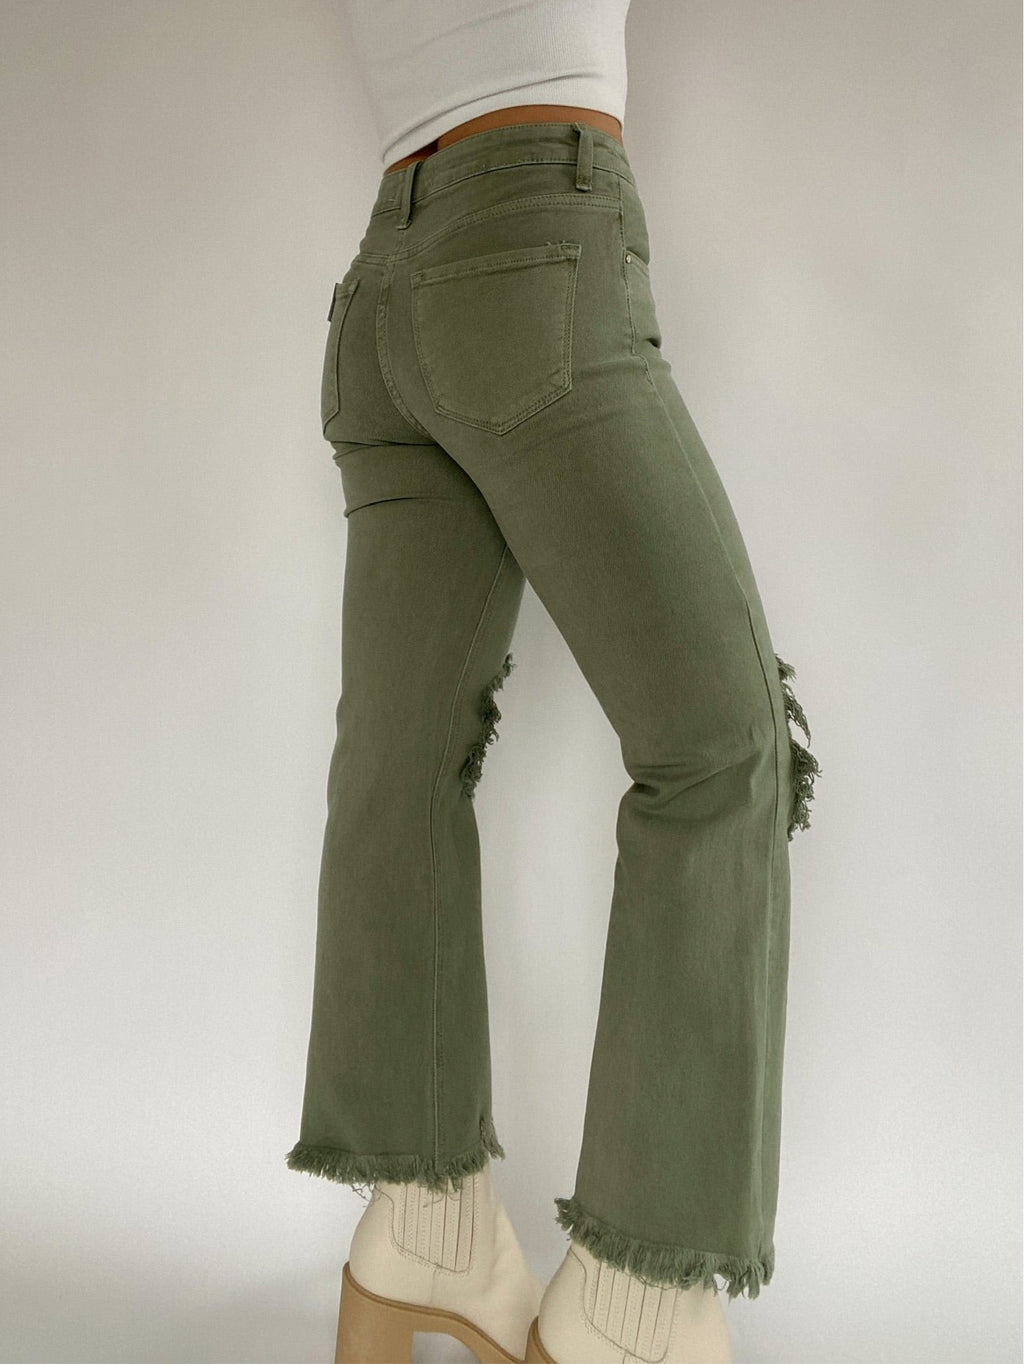 Tate Distressed Jeans - Olive